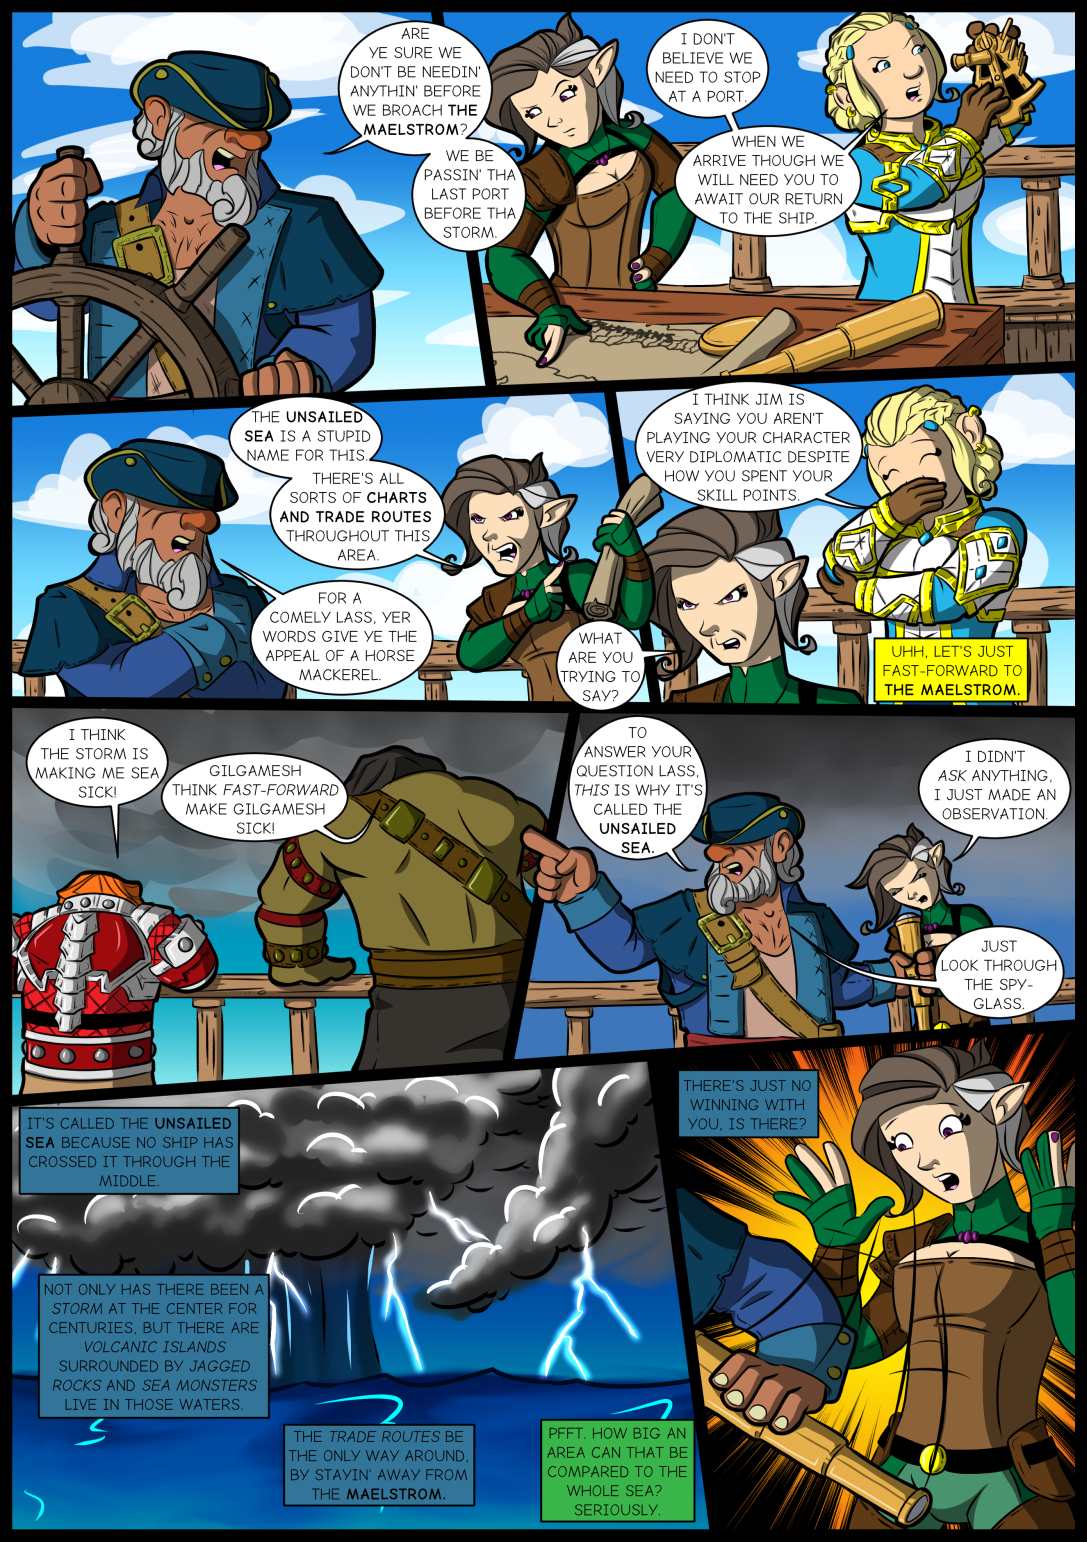 Chapter Four: Issue 12 – Page 1